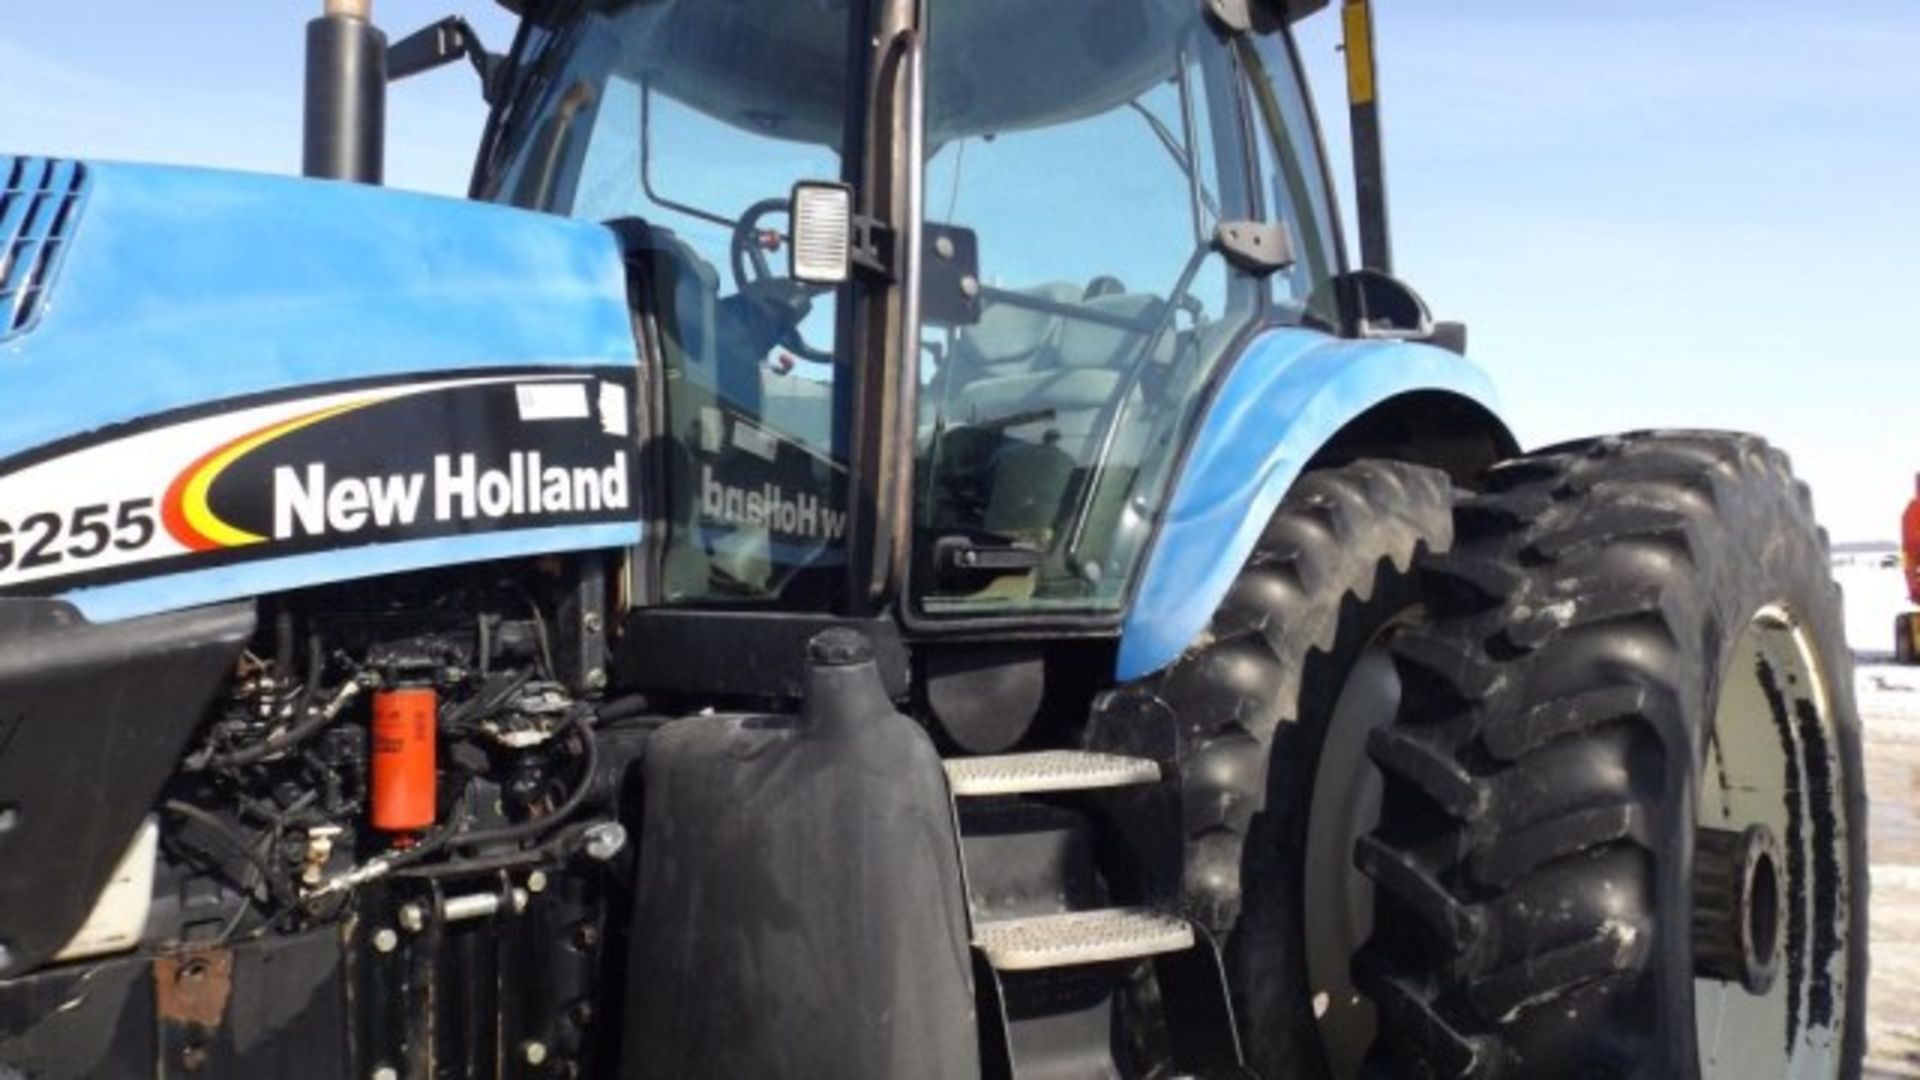 New Holland TG.255 Tractor '04, sn#JAW13511 Fully Equipped Cab, Buddy Seat, super steer - Image 7 of 15